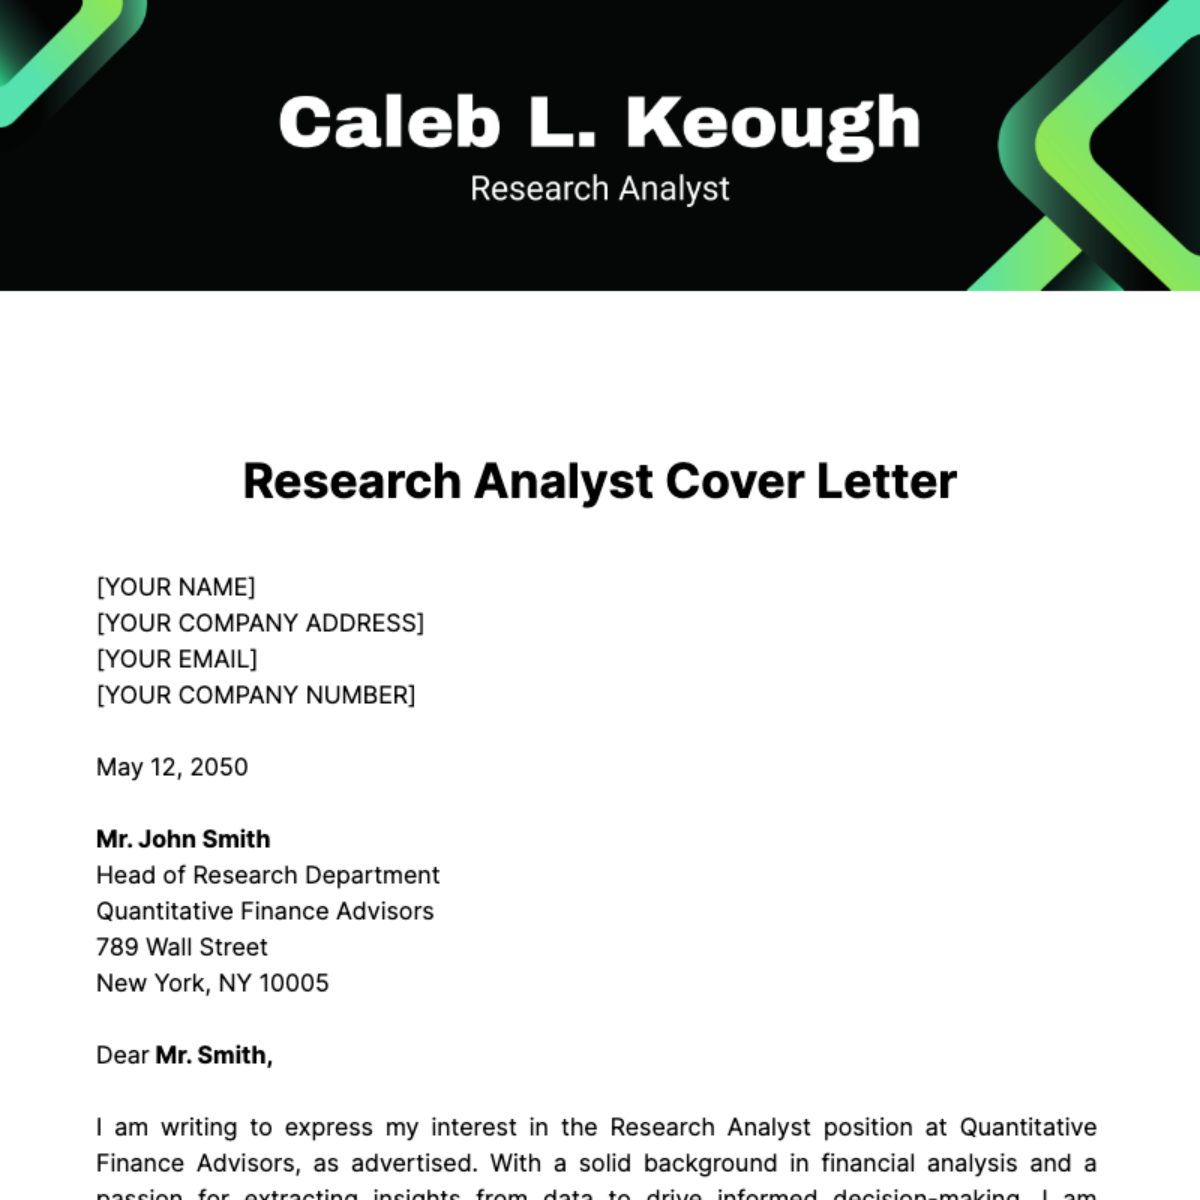 Research Analyst Cover Letter Template